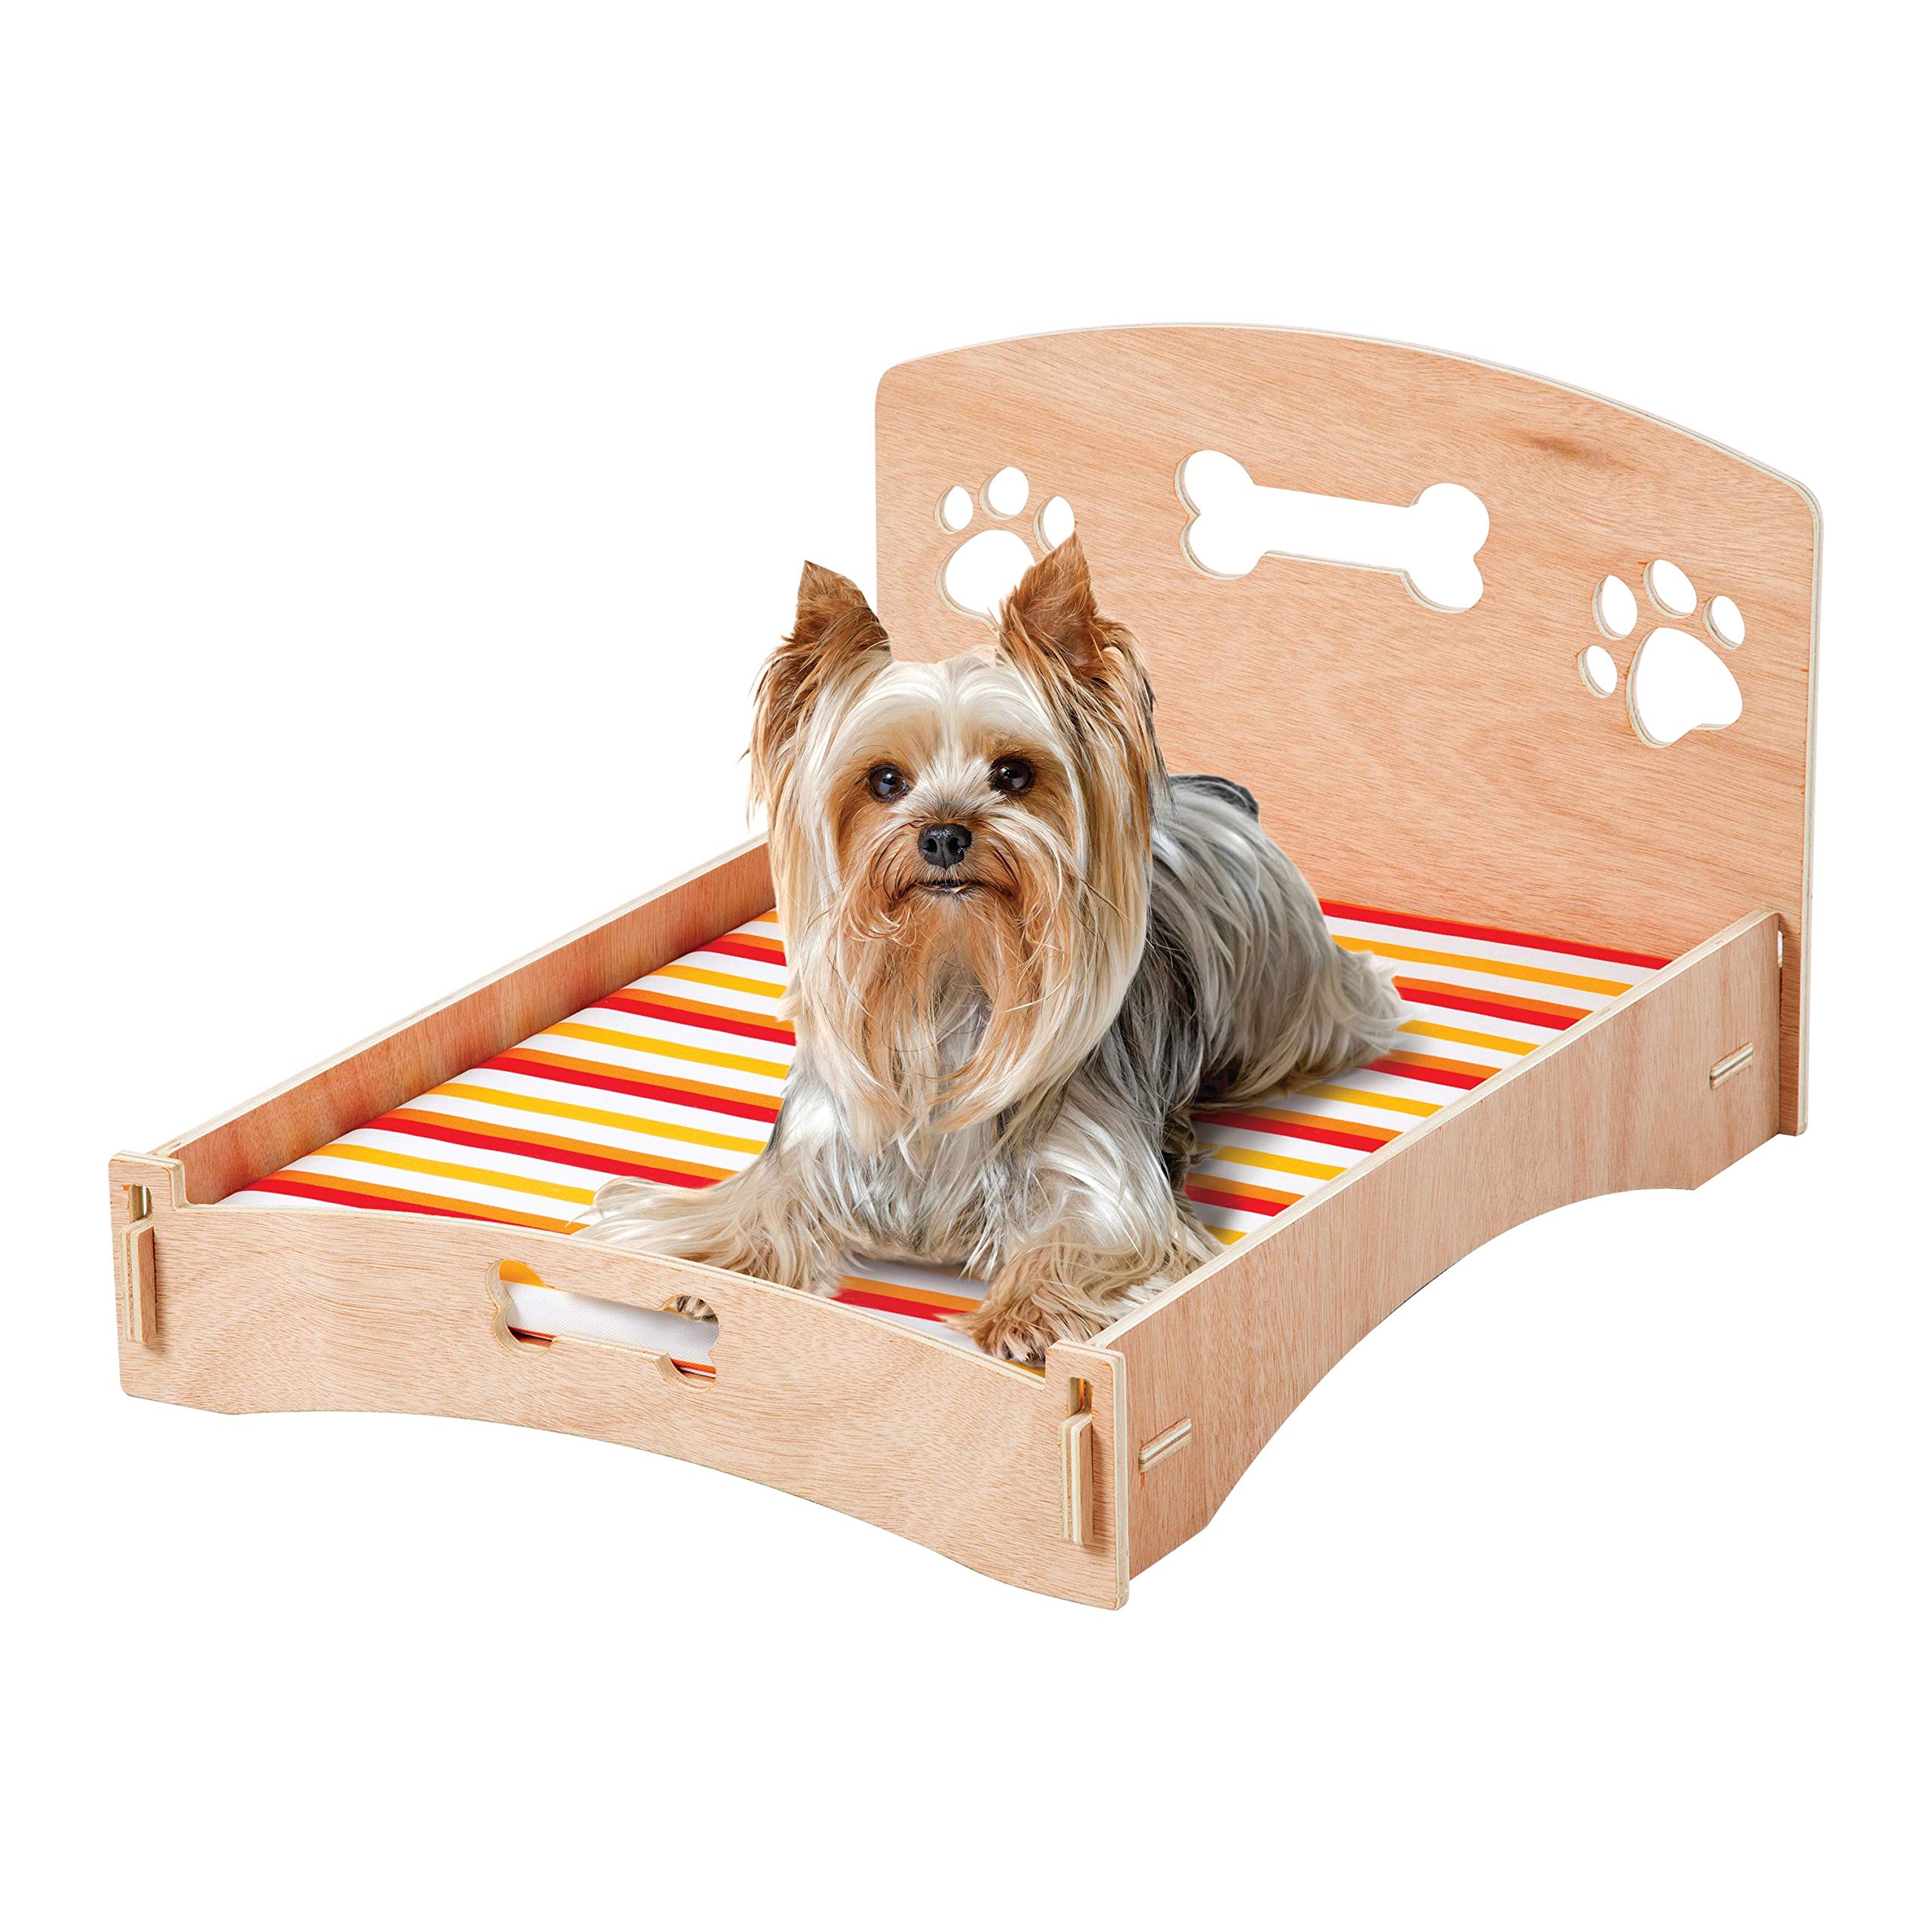 E.P.C. Indoor/Outdoor Bone and Footprint Design Wooden DOG Bed with Cushion